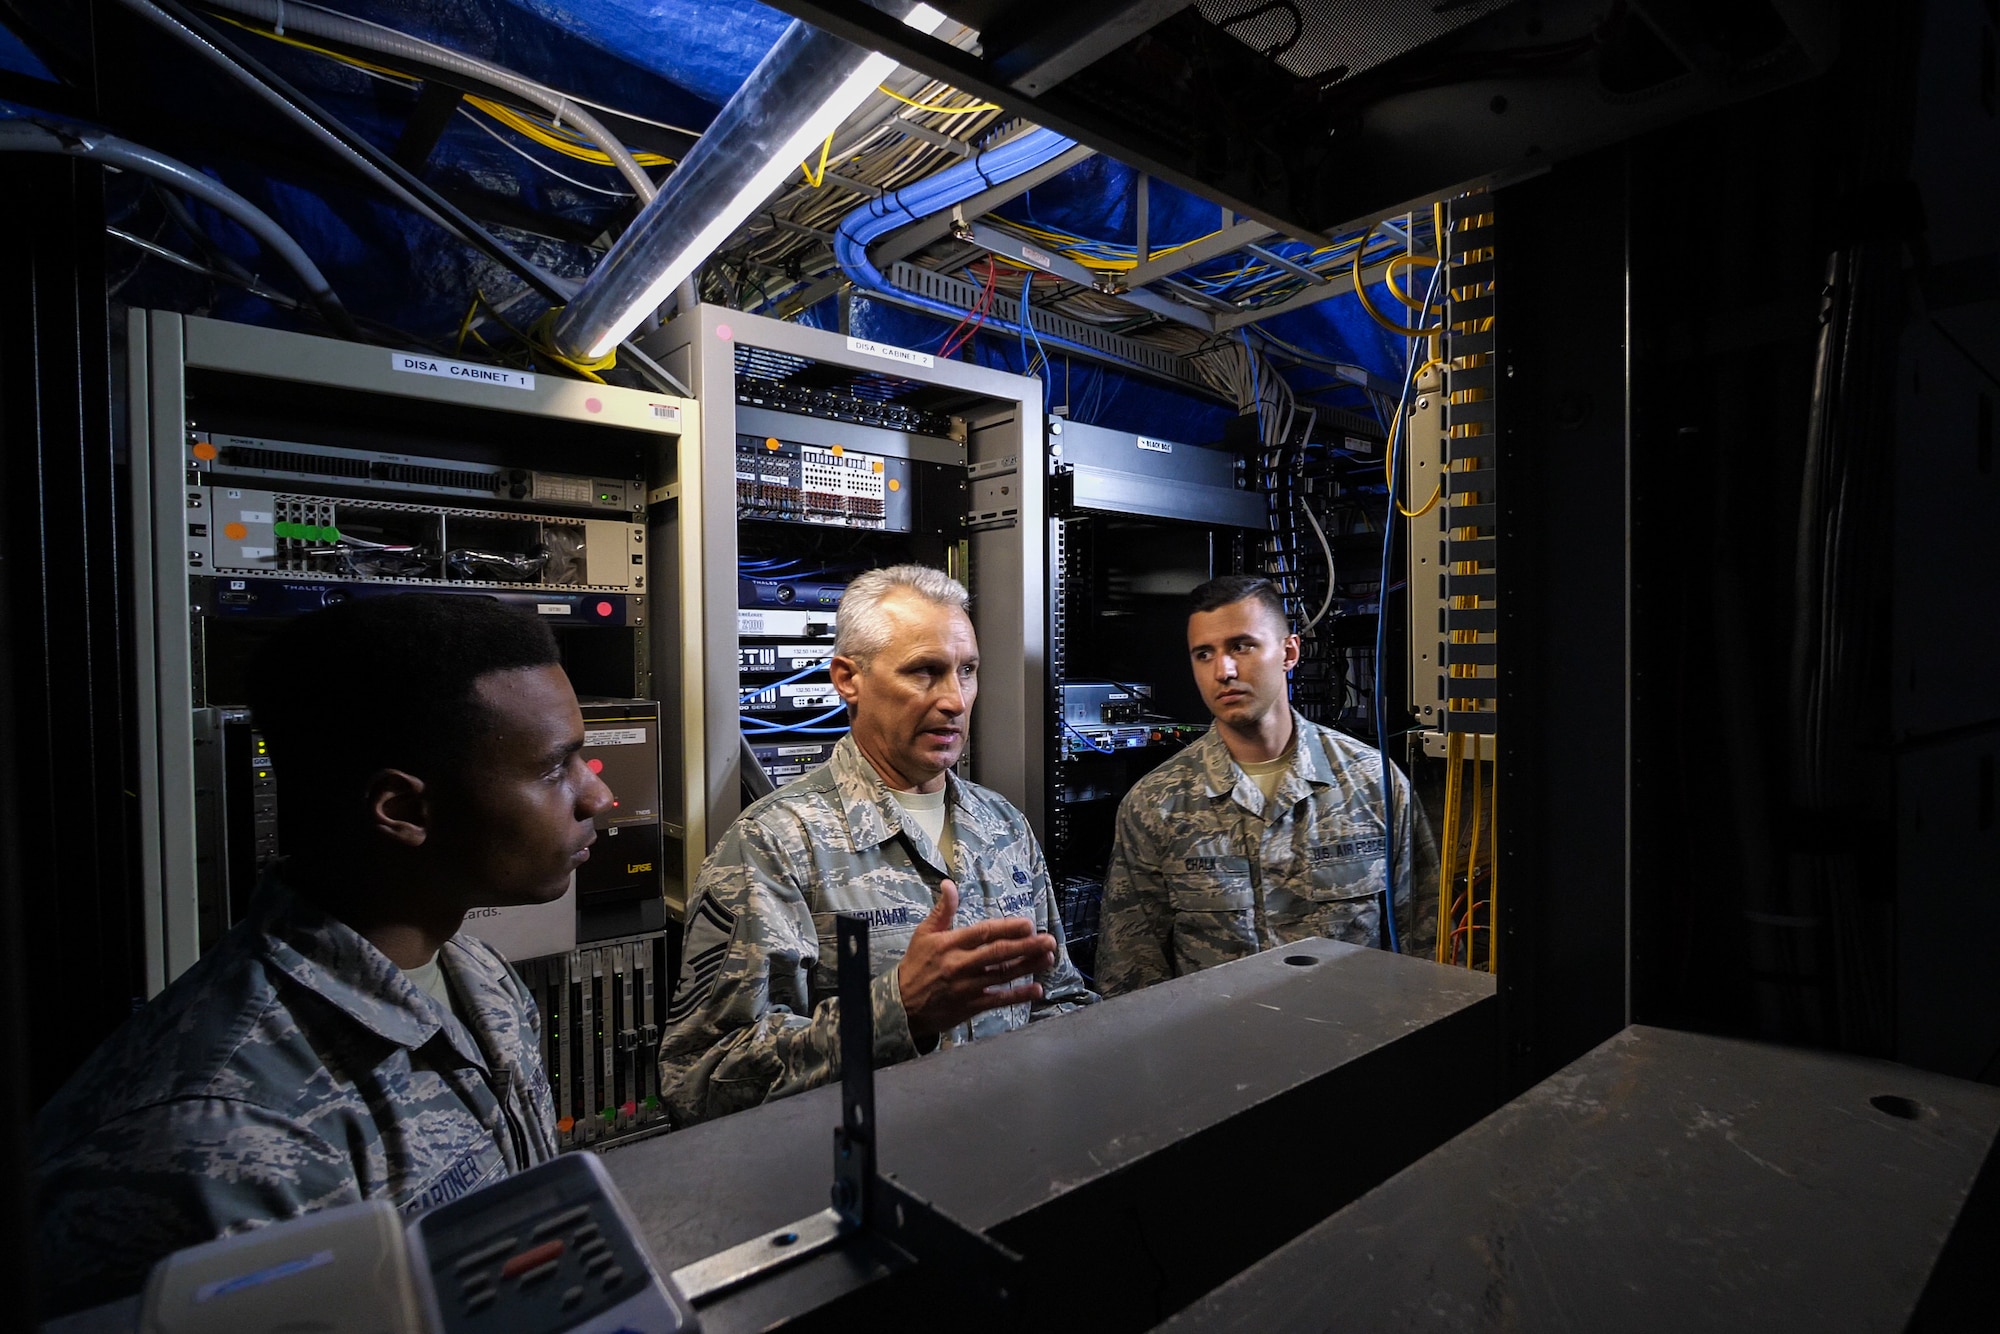 U.S. Air Force Senior Master Sgt. Mark Buchanan, right, cyber systems superintendent and cable systems integrator base level with the 202d Engineering Installation Squadron (EIS), Georgia Air National Guard (ANG), reviews the communications infrastructure with Staff Sgt. Charles Chalk, center, a cable and antenna technician, and Staff Sgt. Wilson Gardner, an airfield systems technician at Muñiz ANG Base in San Juan, Puerto Rico, April 19, 2018. The 202d EIS deployed to the Puerto Rico Air National Guard’s 156th Airlift Wing as part of the Hurricane Irma and Maria recovery efforts to spearhead a large-scale project relocating communications systems cabling and equipment to a new hardened facility. The total project will be a collaborative effort between ANG EIS units, military civil engineer teams, 156th Communications Flight, Defense Information Systems Agency and commercial service providers, meant to provide a cost-effective solution to bolster and protect the communication infrastructure for the 156th AW. (U.S. Air National Guard photo by Senior Master Sgt. Roger Parsons).